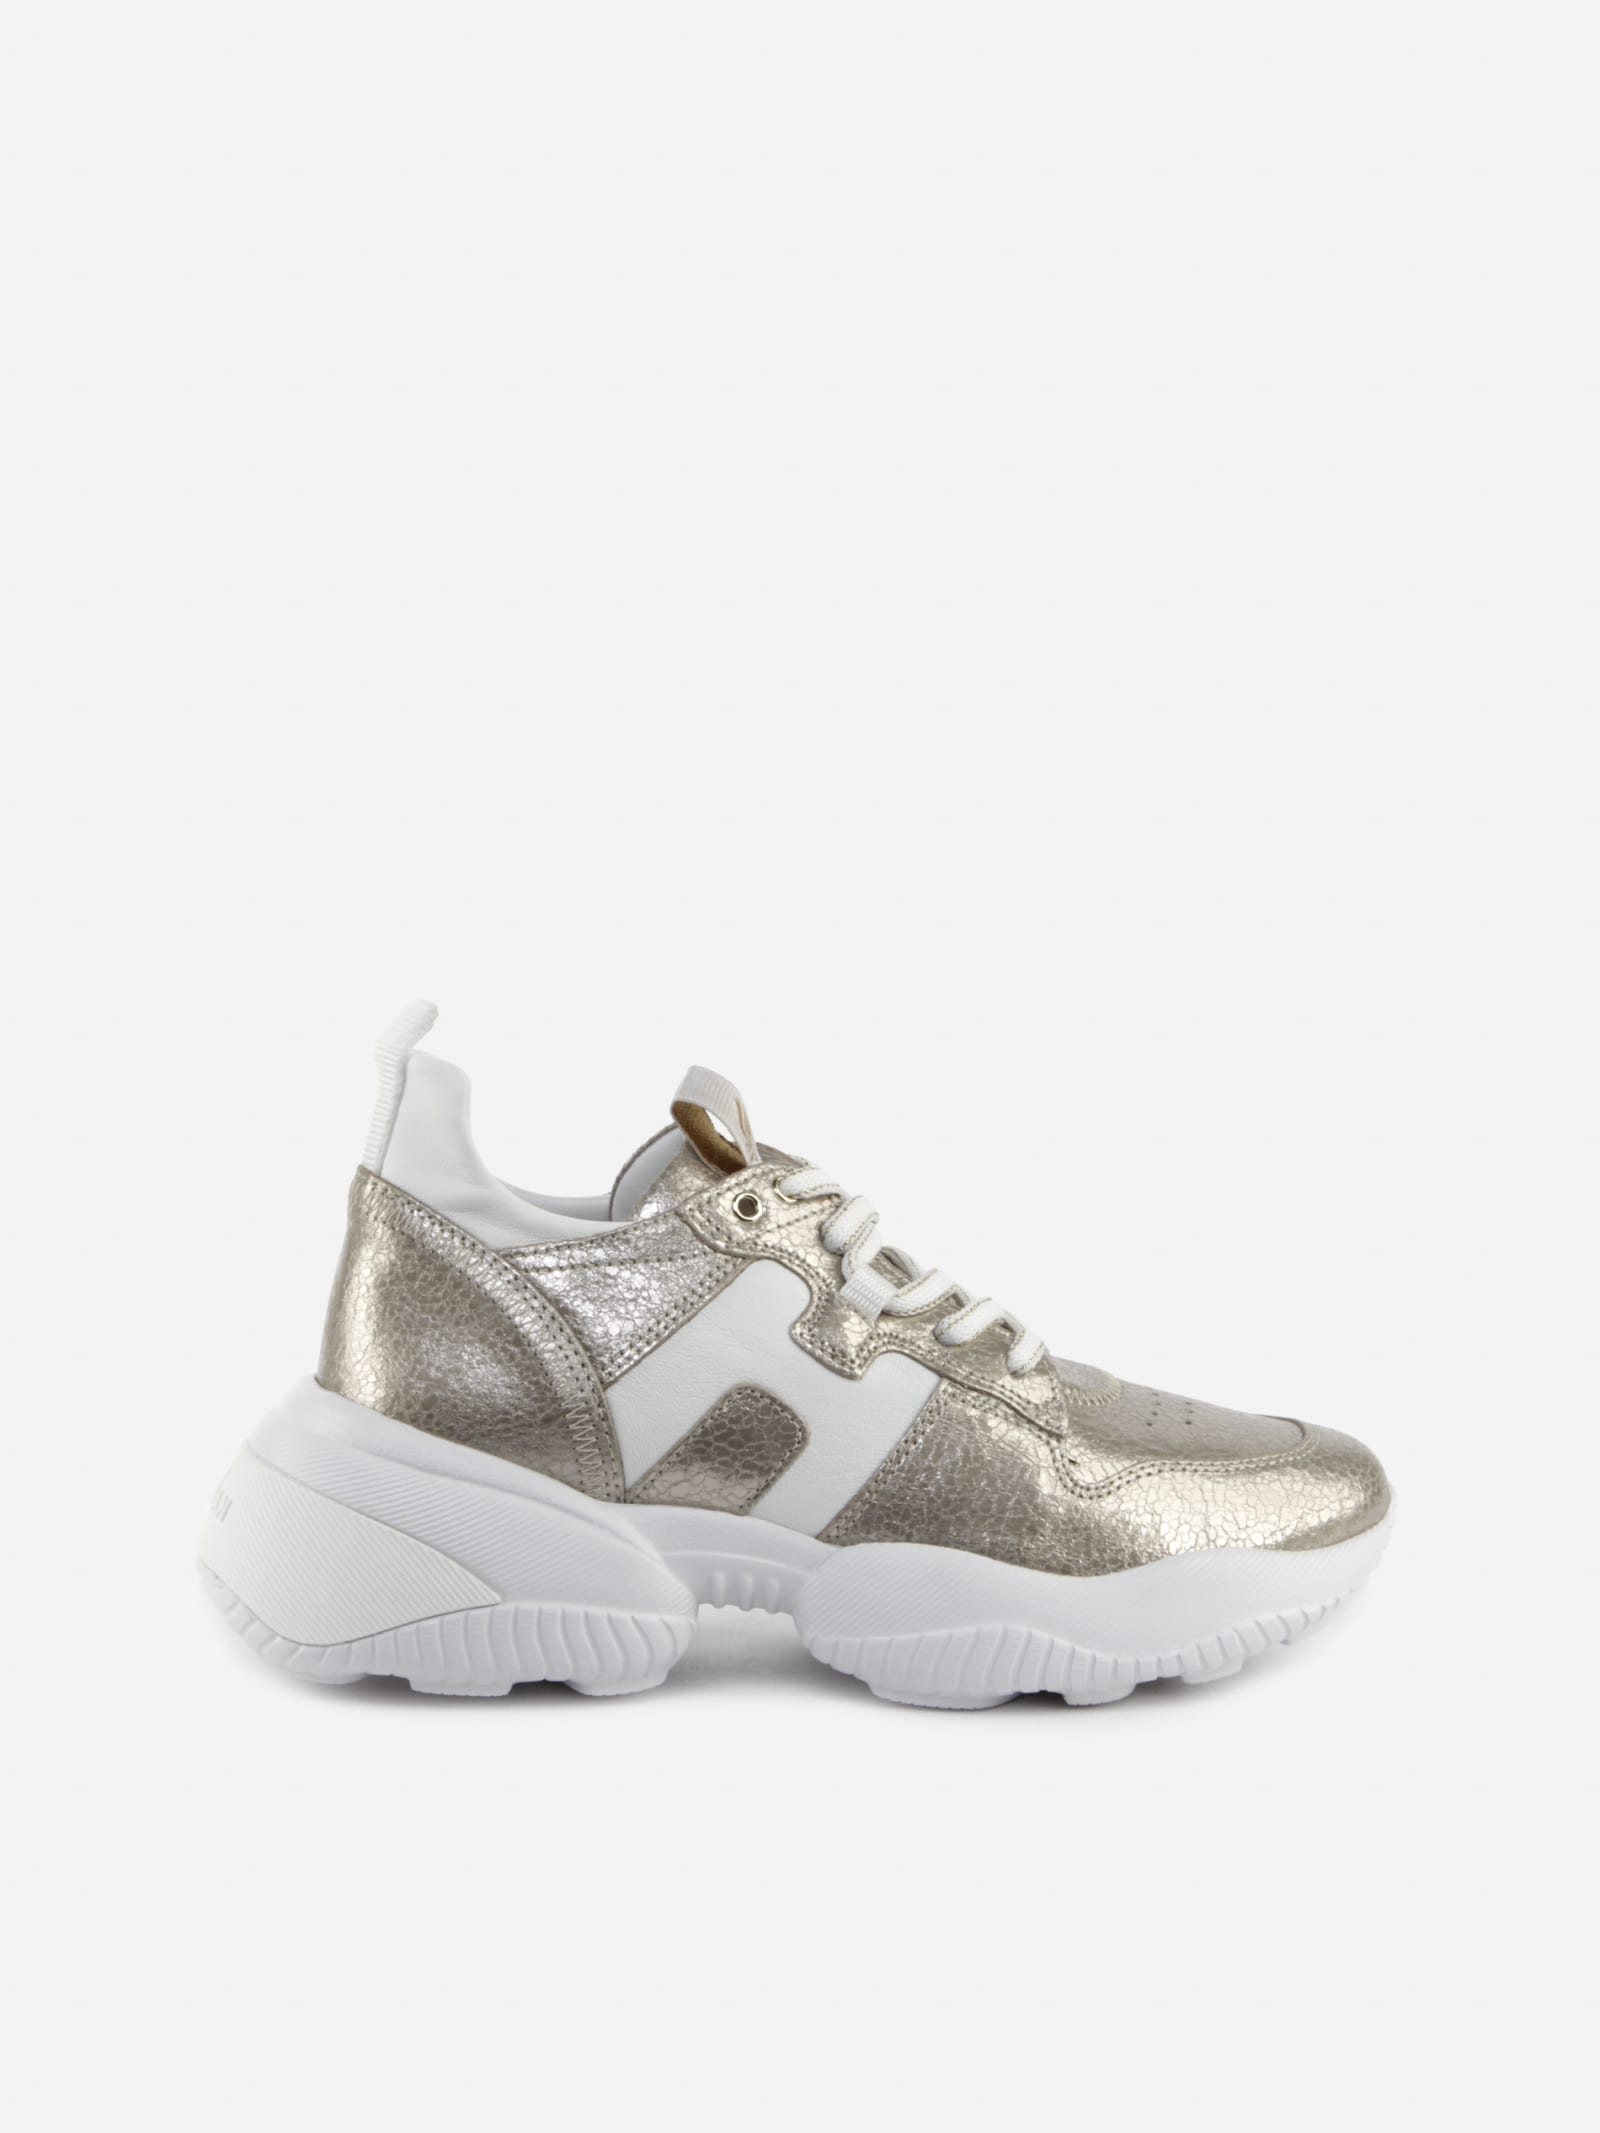 Hogan Interaction Sneakers In Leather With Pearly Finish